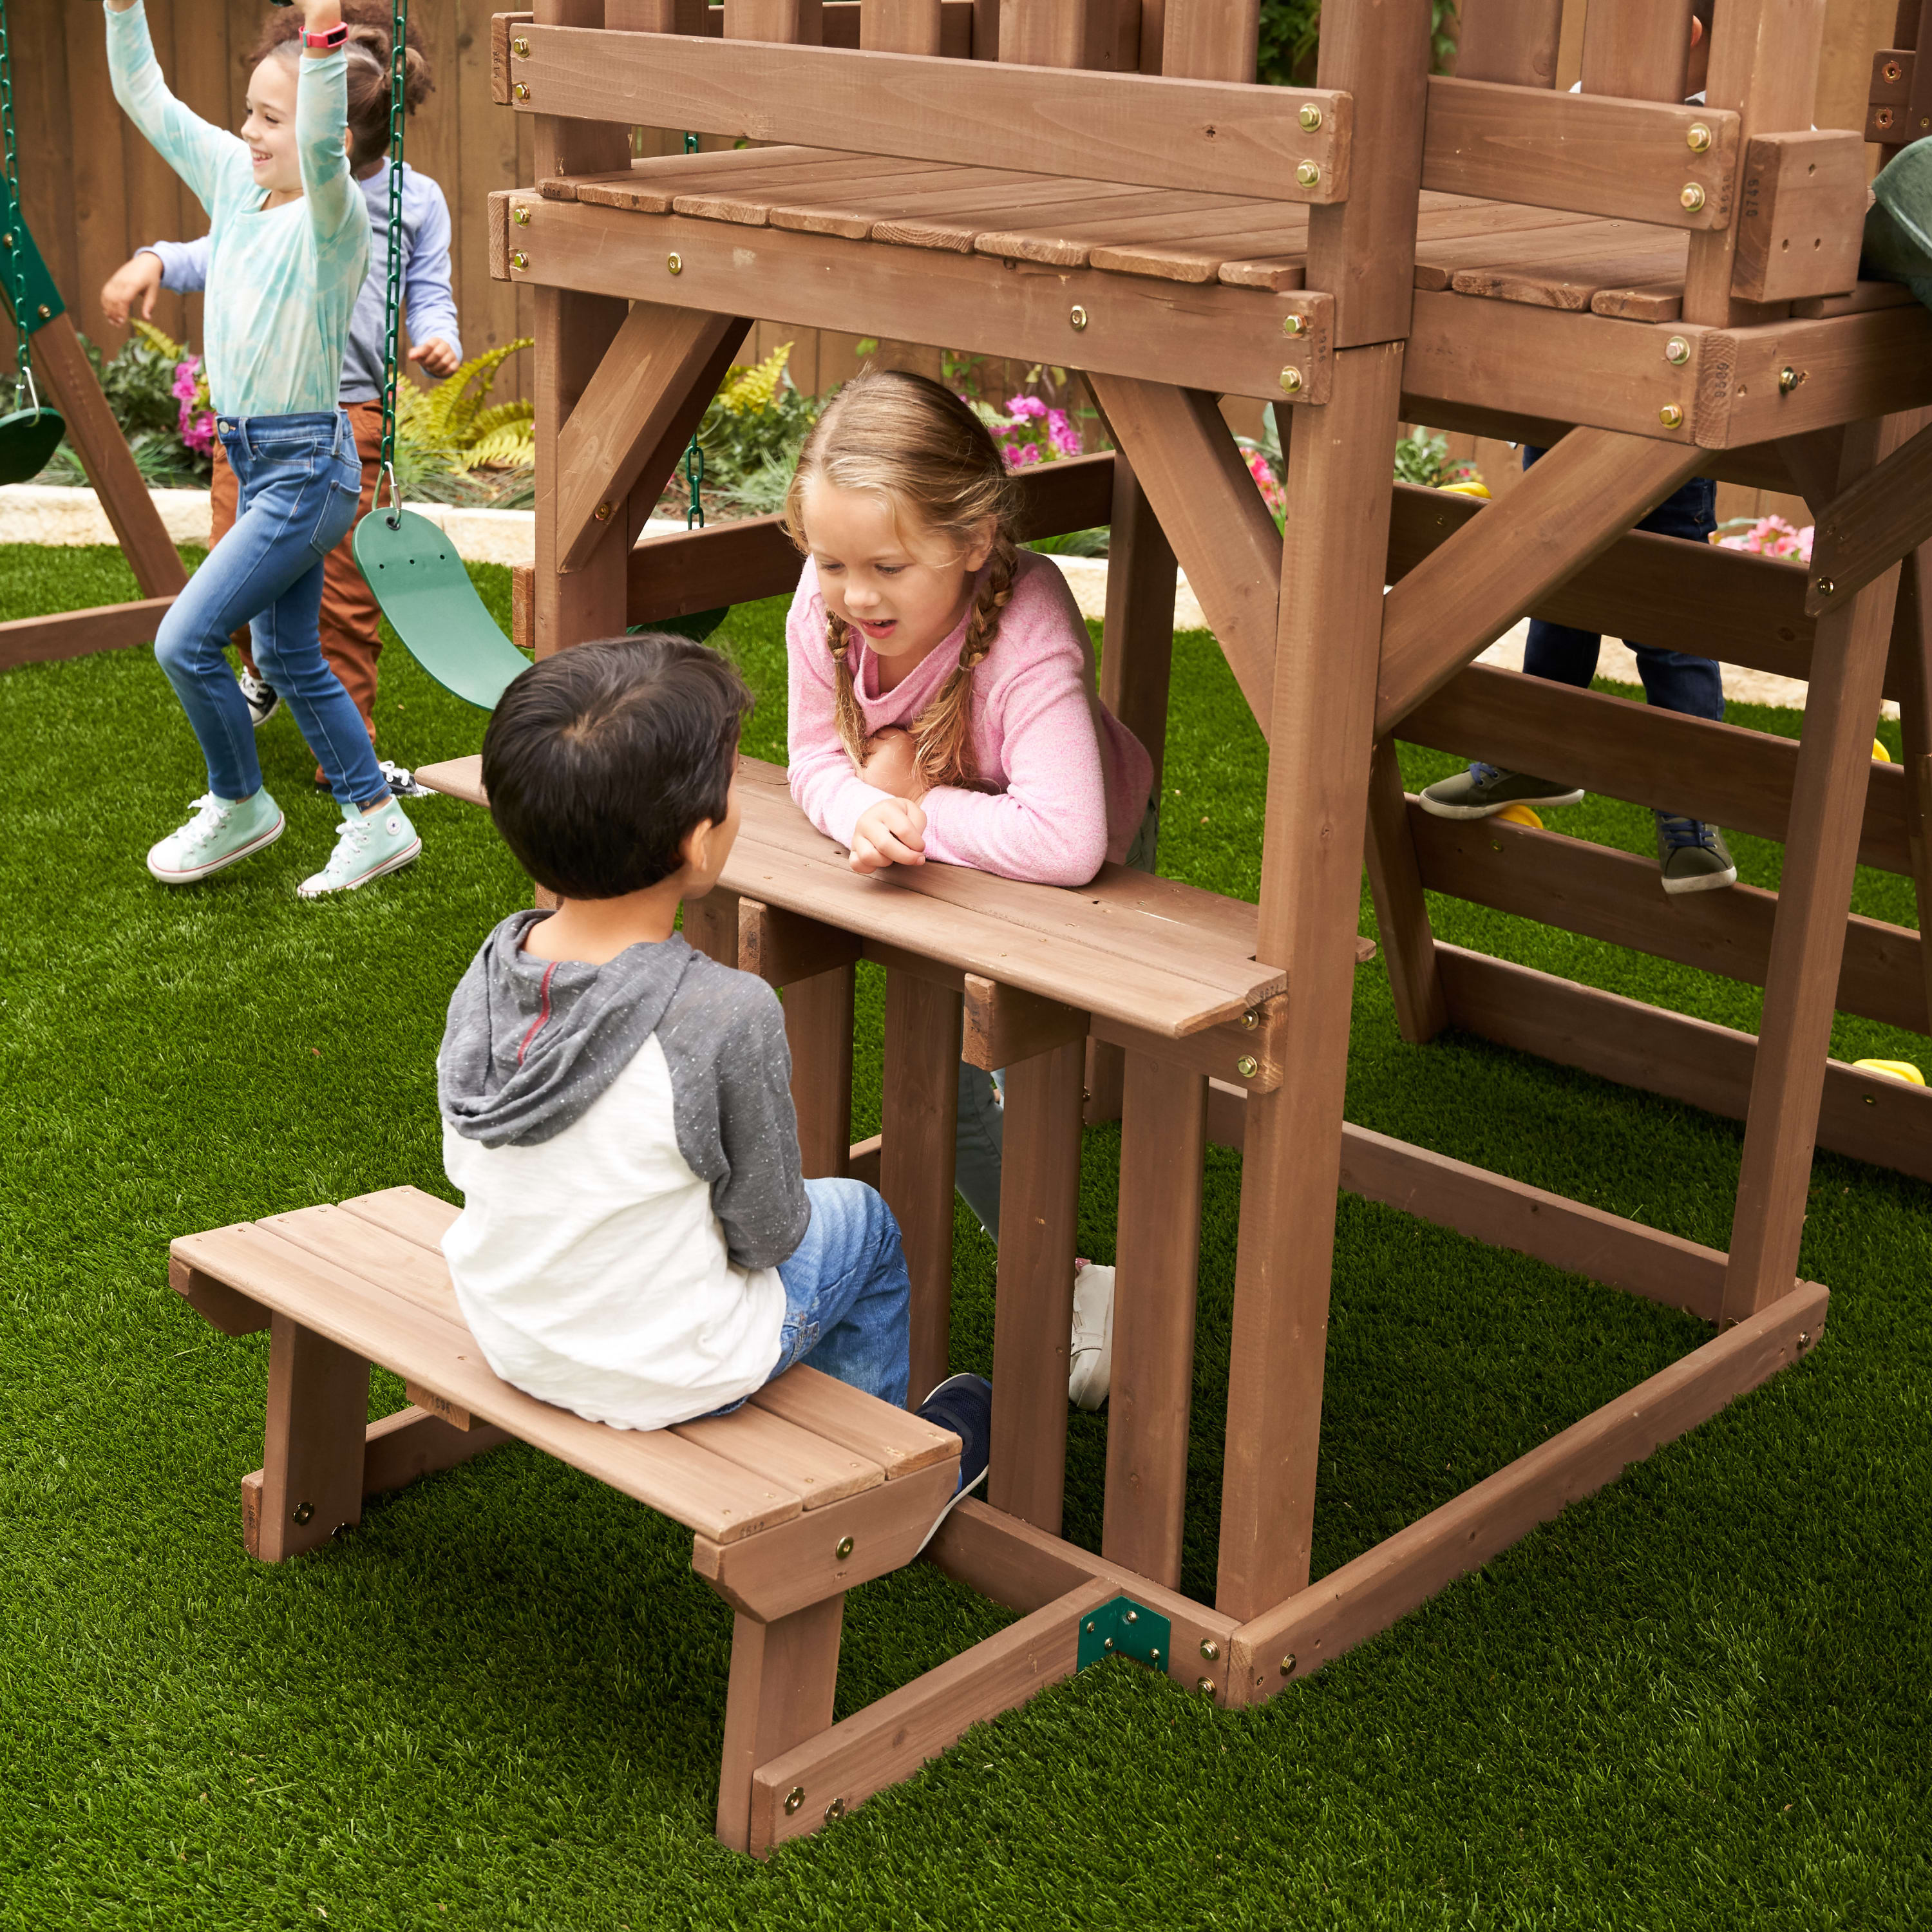 KidKraft Arbor Crest Wooden Swing Set / Playset with Table and Bench - image 5 of 11